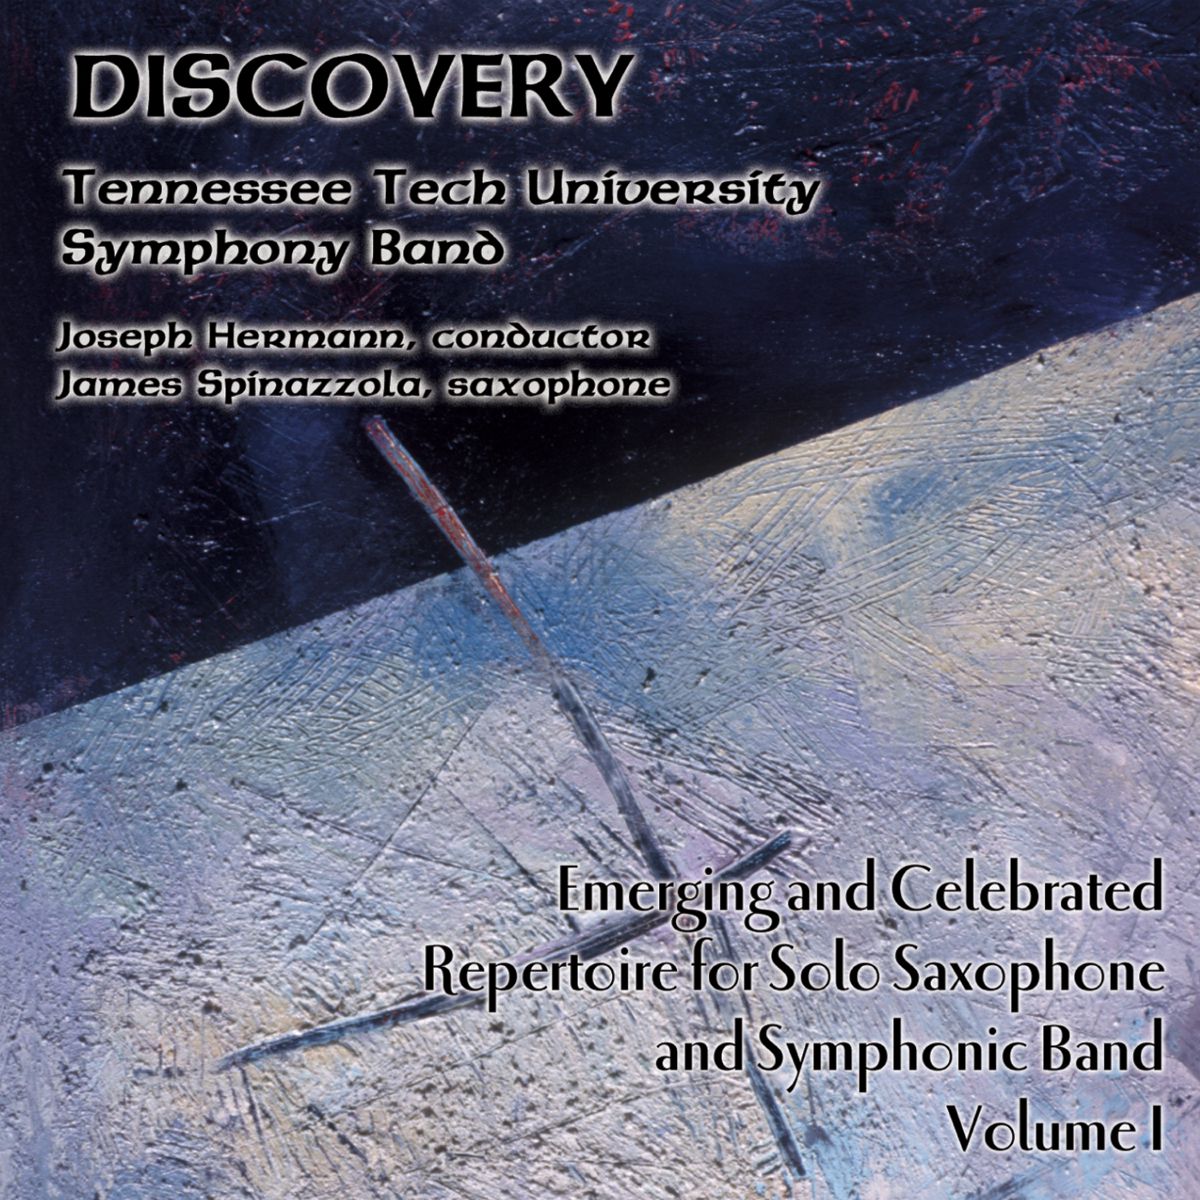 Discovery: Emerging and Celebrated Repertoire for Saxophone and Symphonic Band #1 - click here